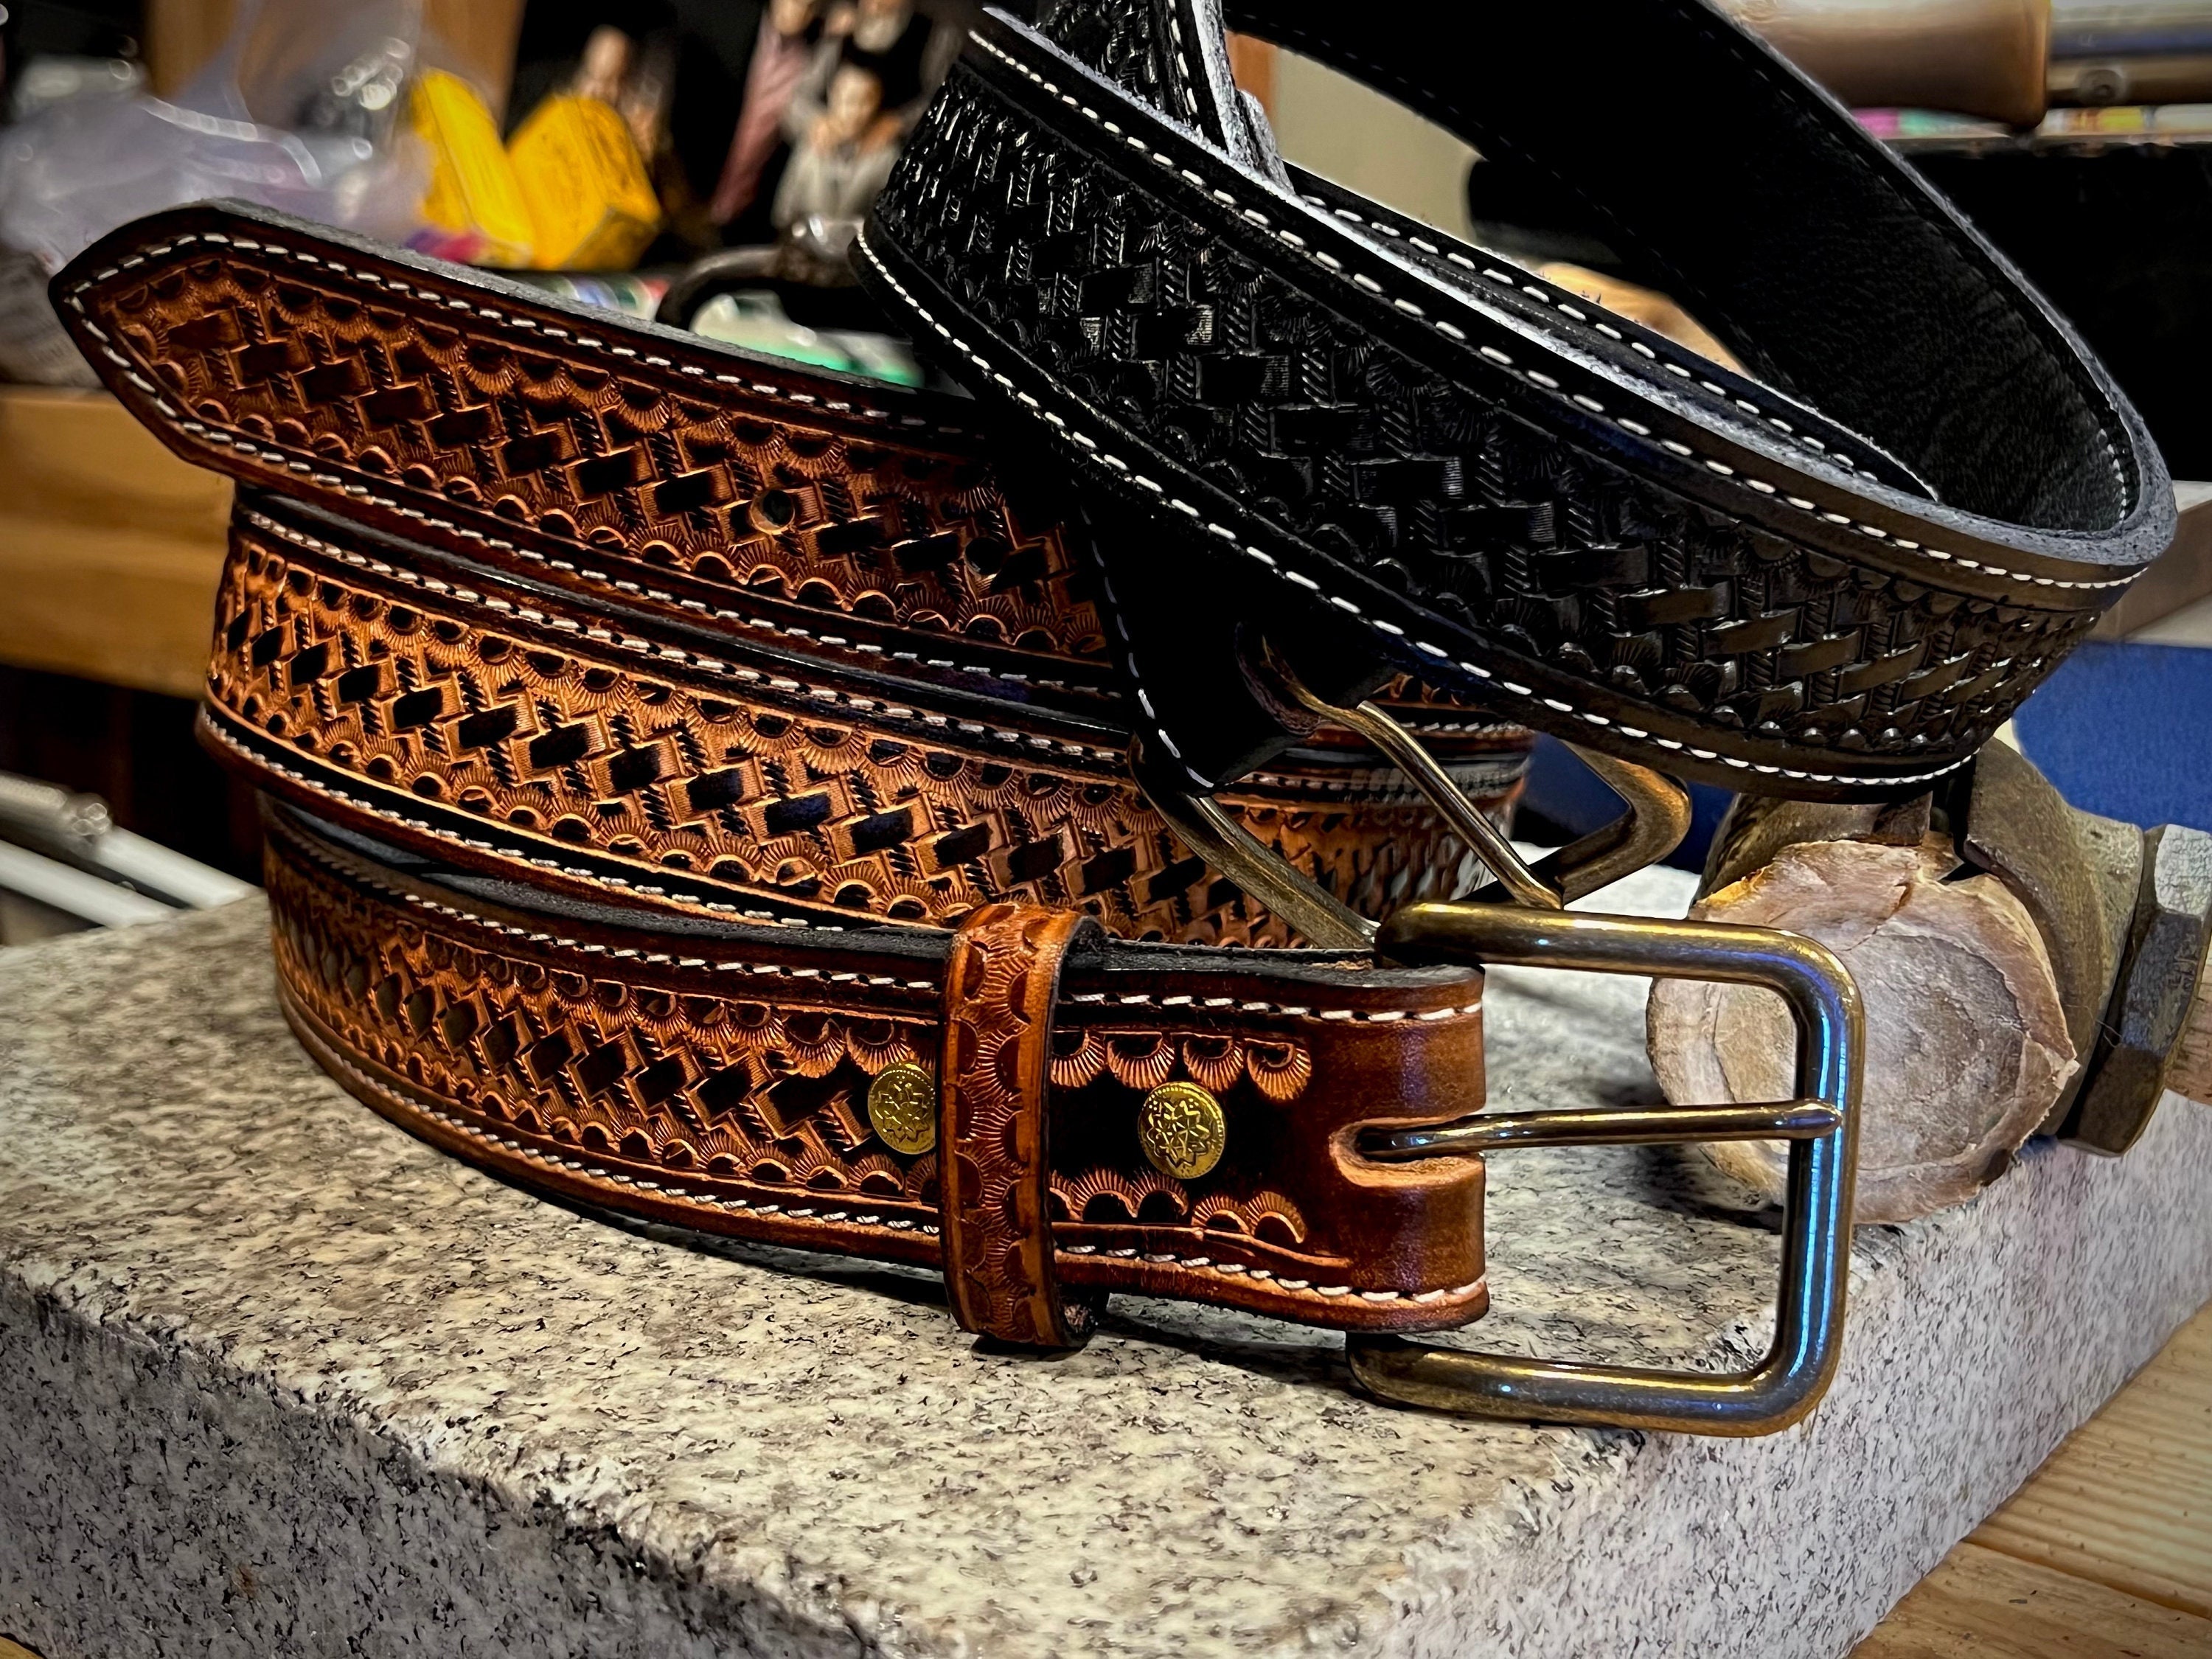 Deluxe Tooled Leather Belt - Hand Tooling Basket Weave - Full Grain Handmade - Antique Brass Buckle - Chicago Screws Made in USA - Western